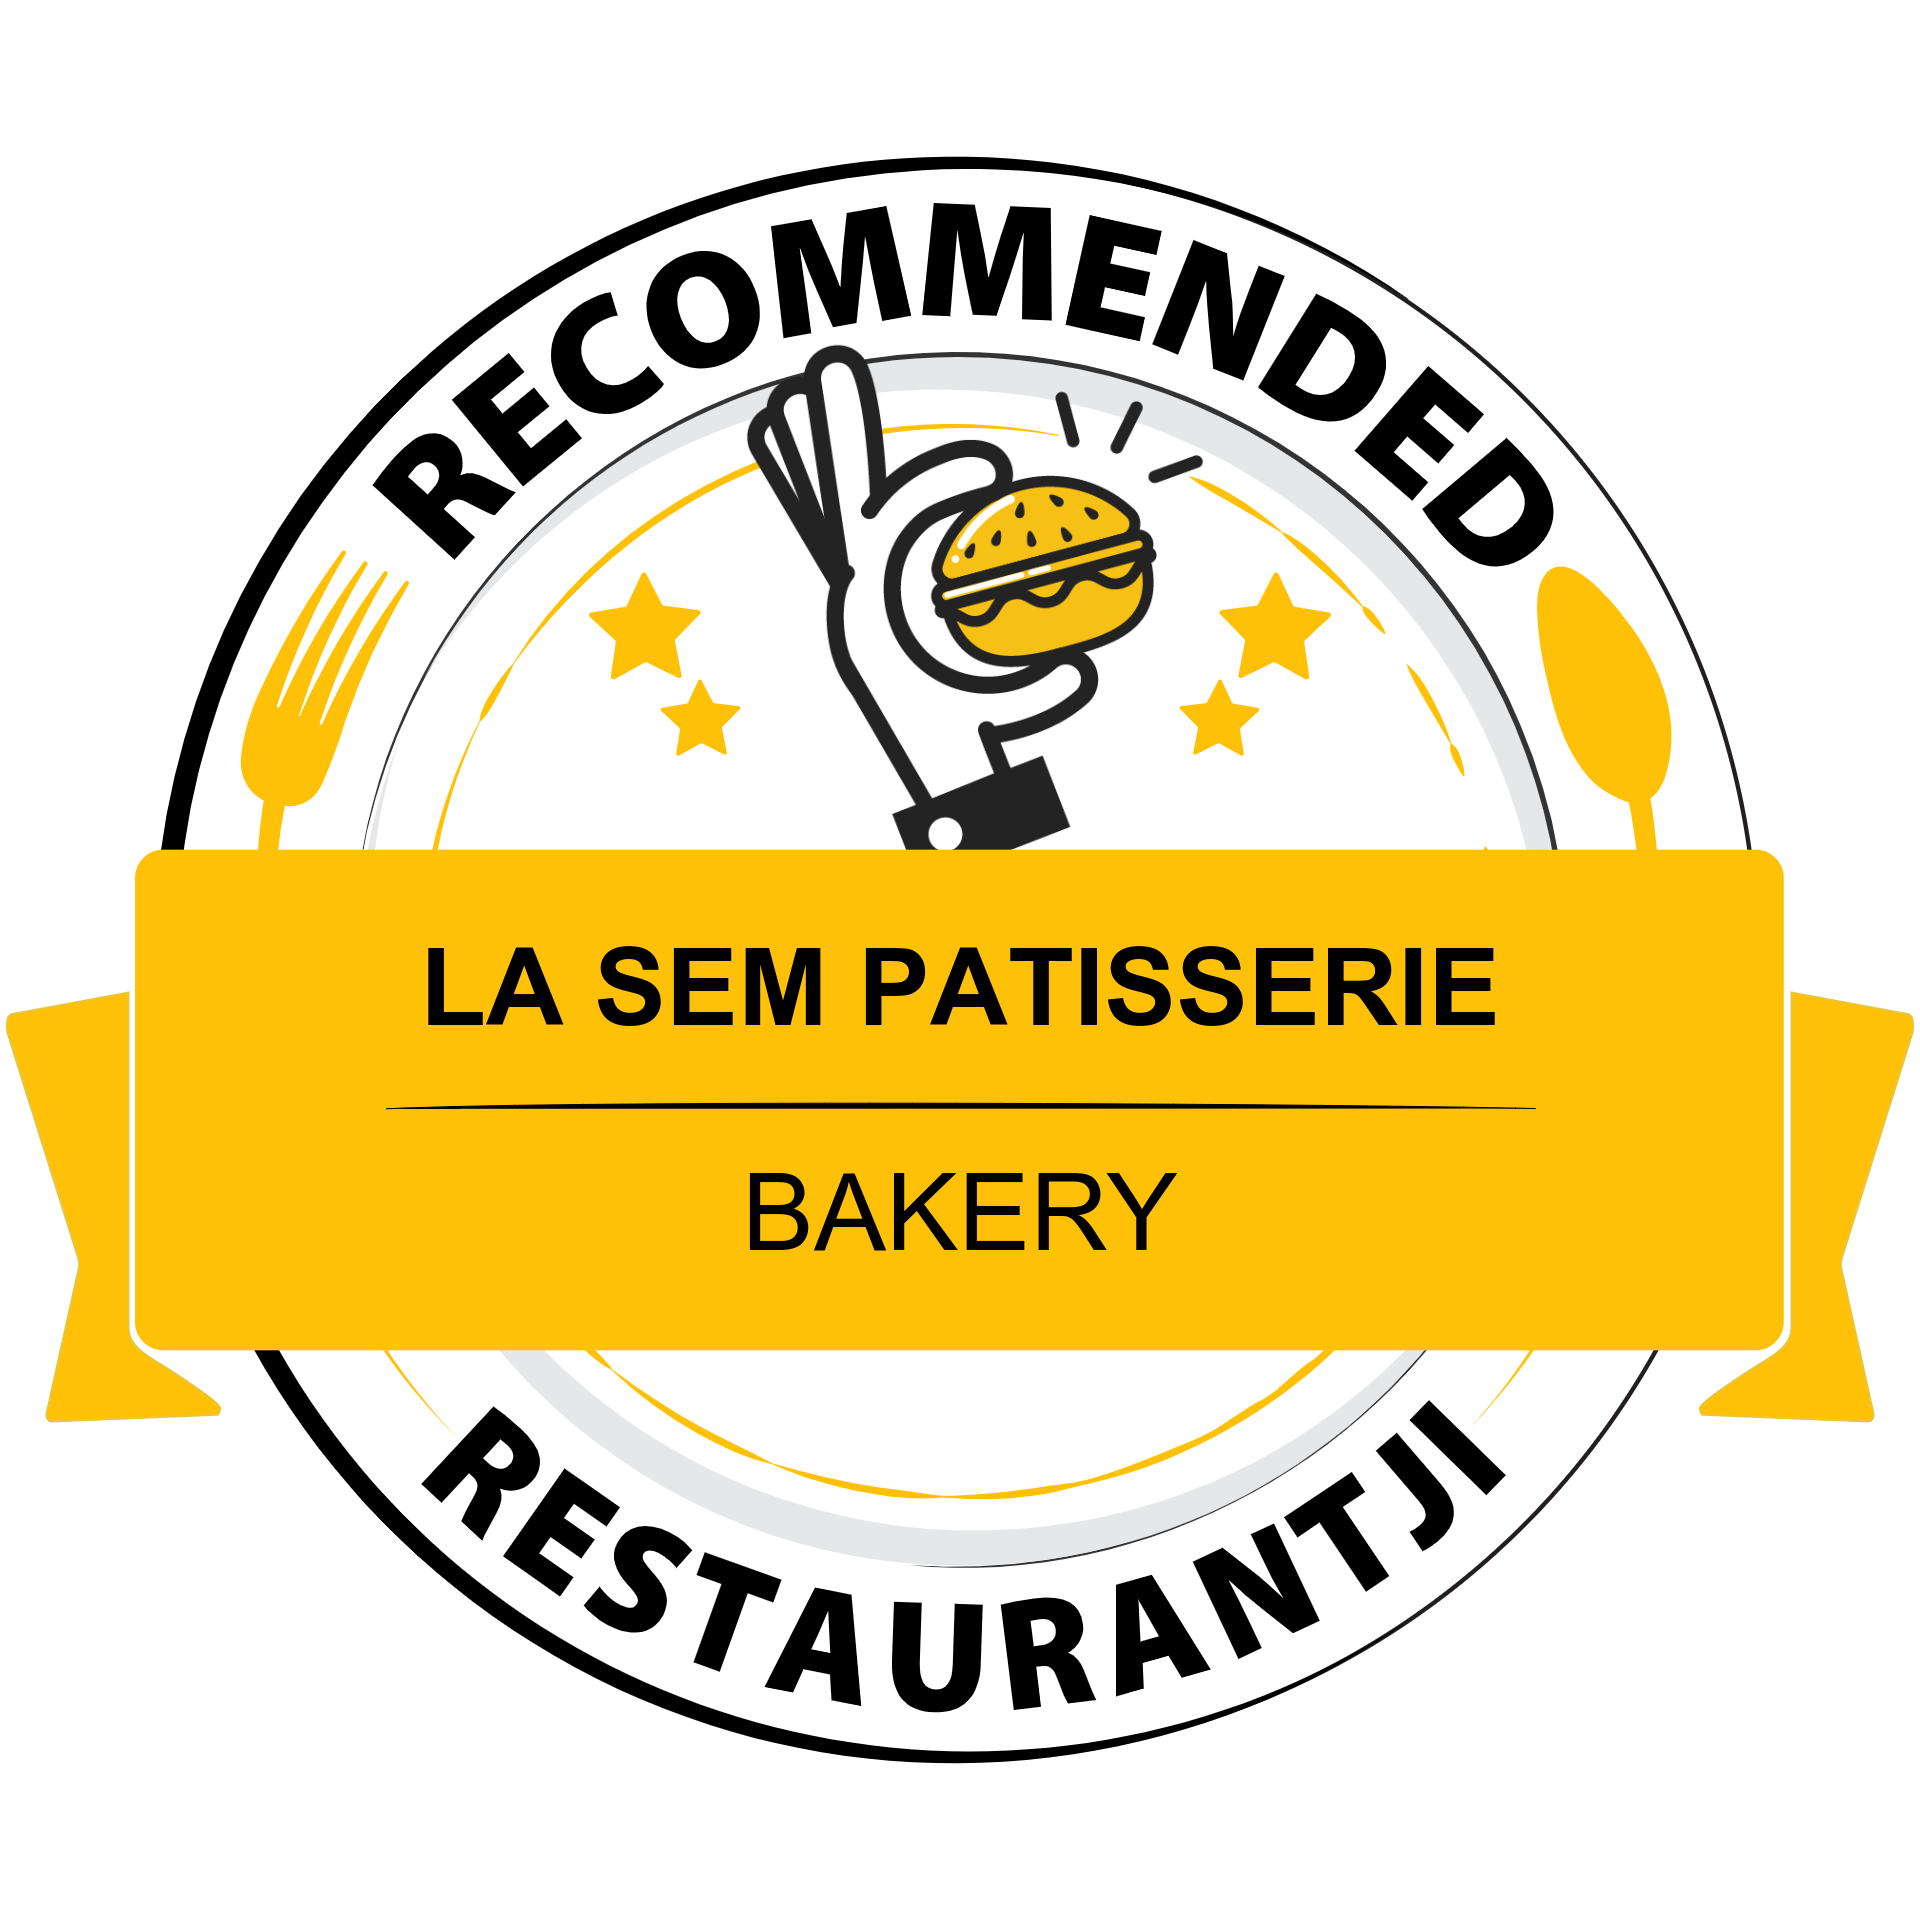 La Sem Patisserie is celebrated on Restaurantji - an ultimate directory with restaurant reviews, menus and photos.